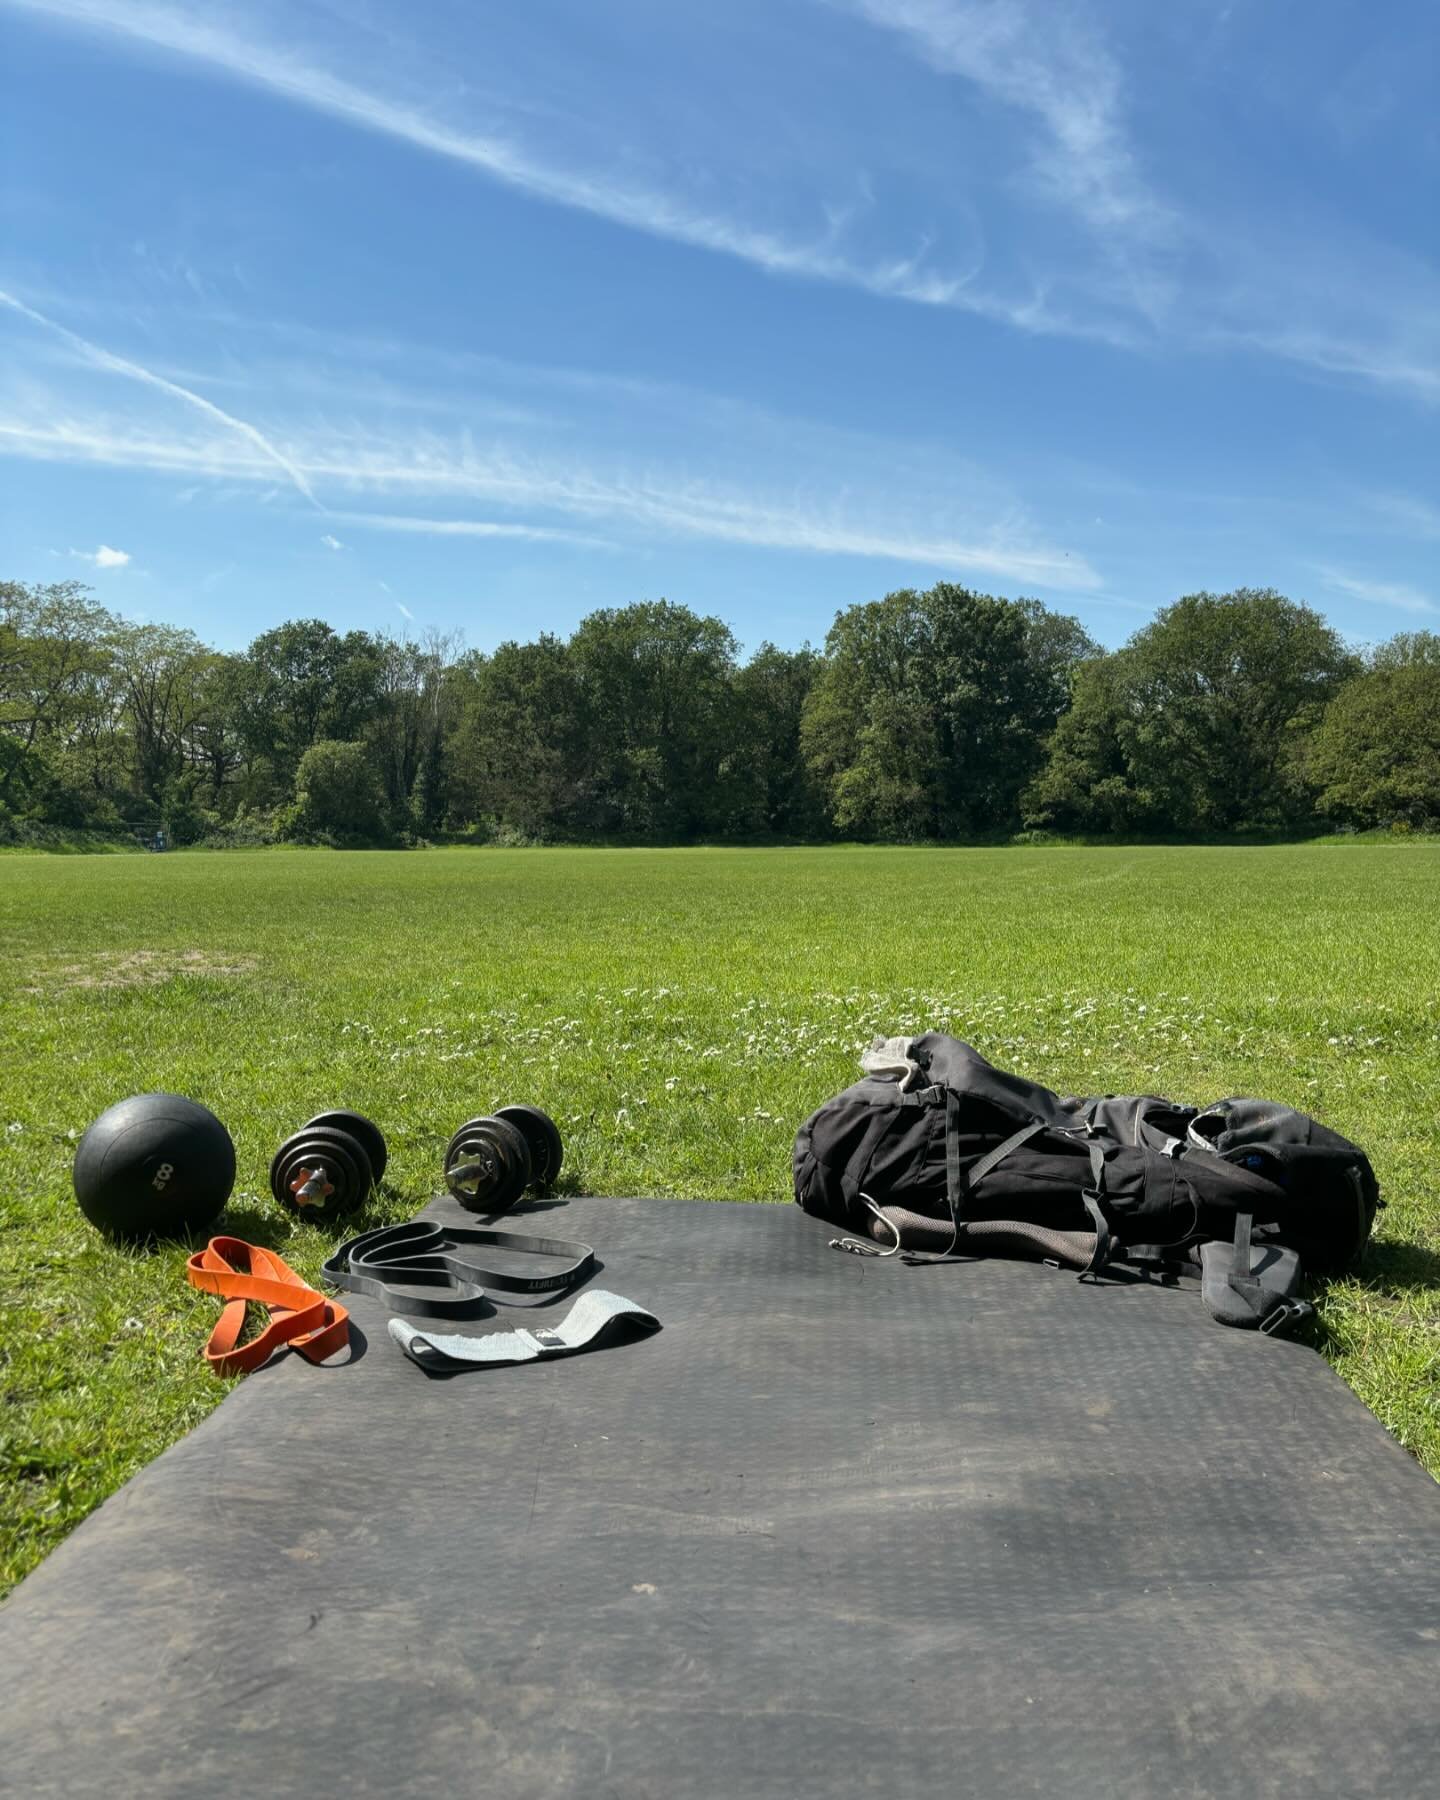 Benefits of training outside&hellip;

1. Getting out in nature and getting outside the 4 walls of a gym
2. Open skies, open mind
3. No sharing equipment or waiting around 
4. A bloody good tan or a proper soaking, both of which are great for you gett